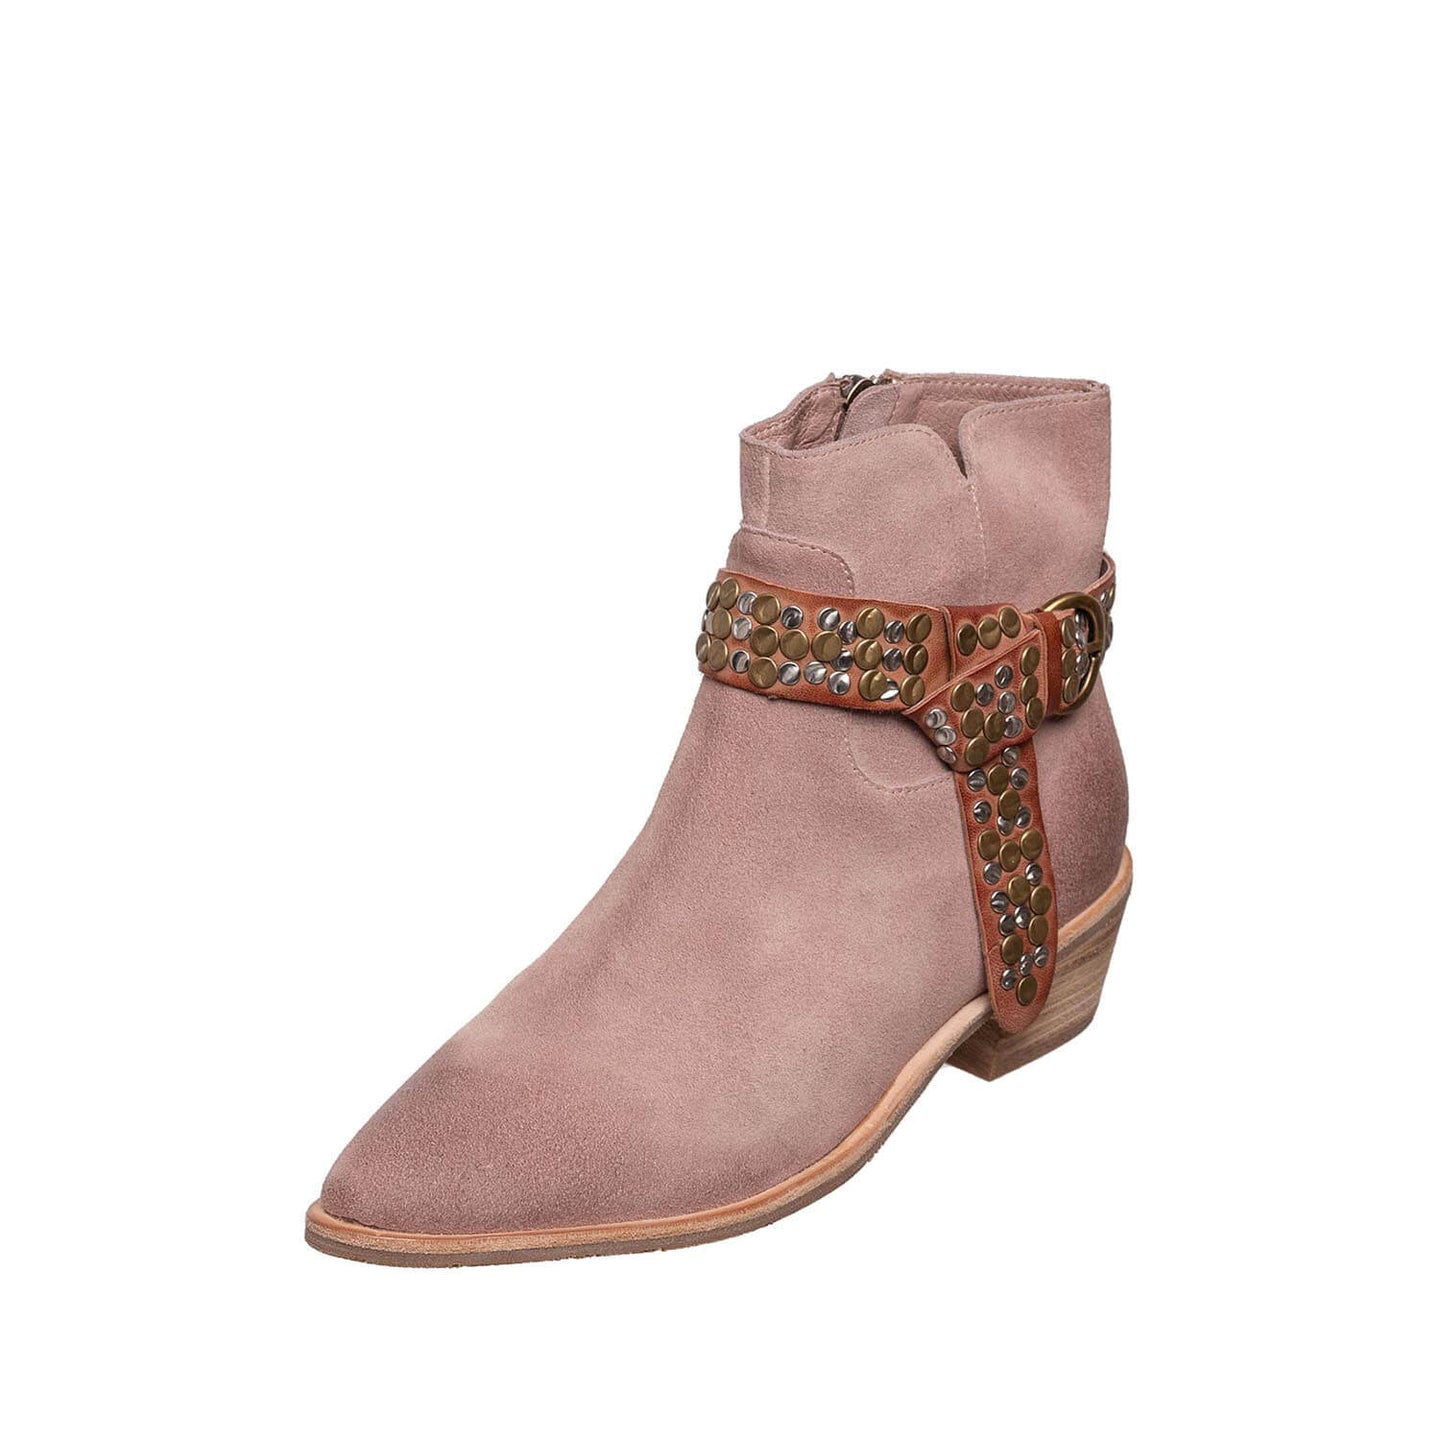 M03 Demi Western Ankle Boots - Blush